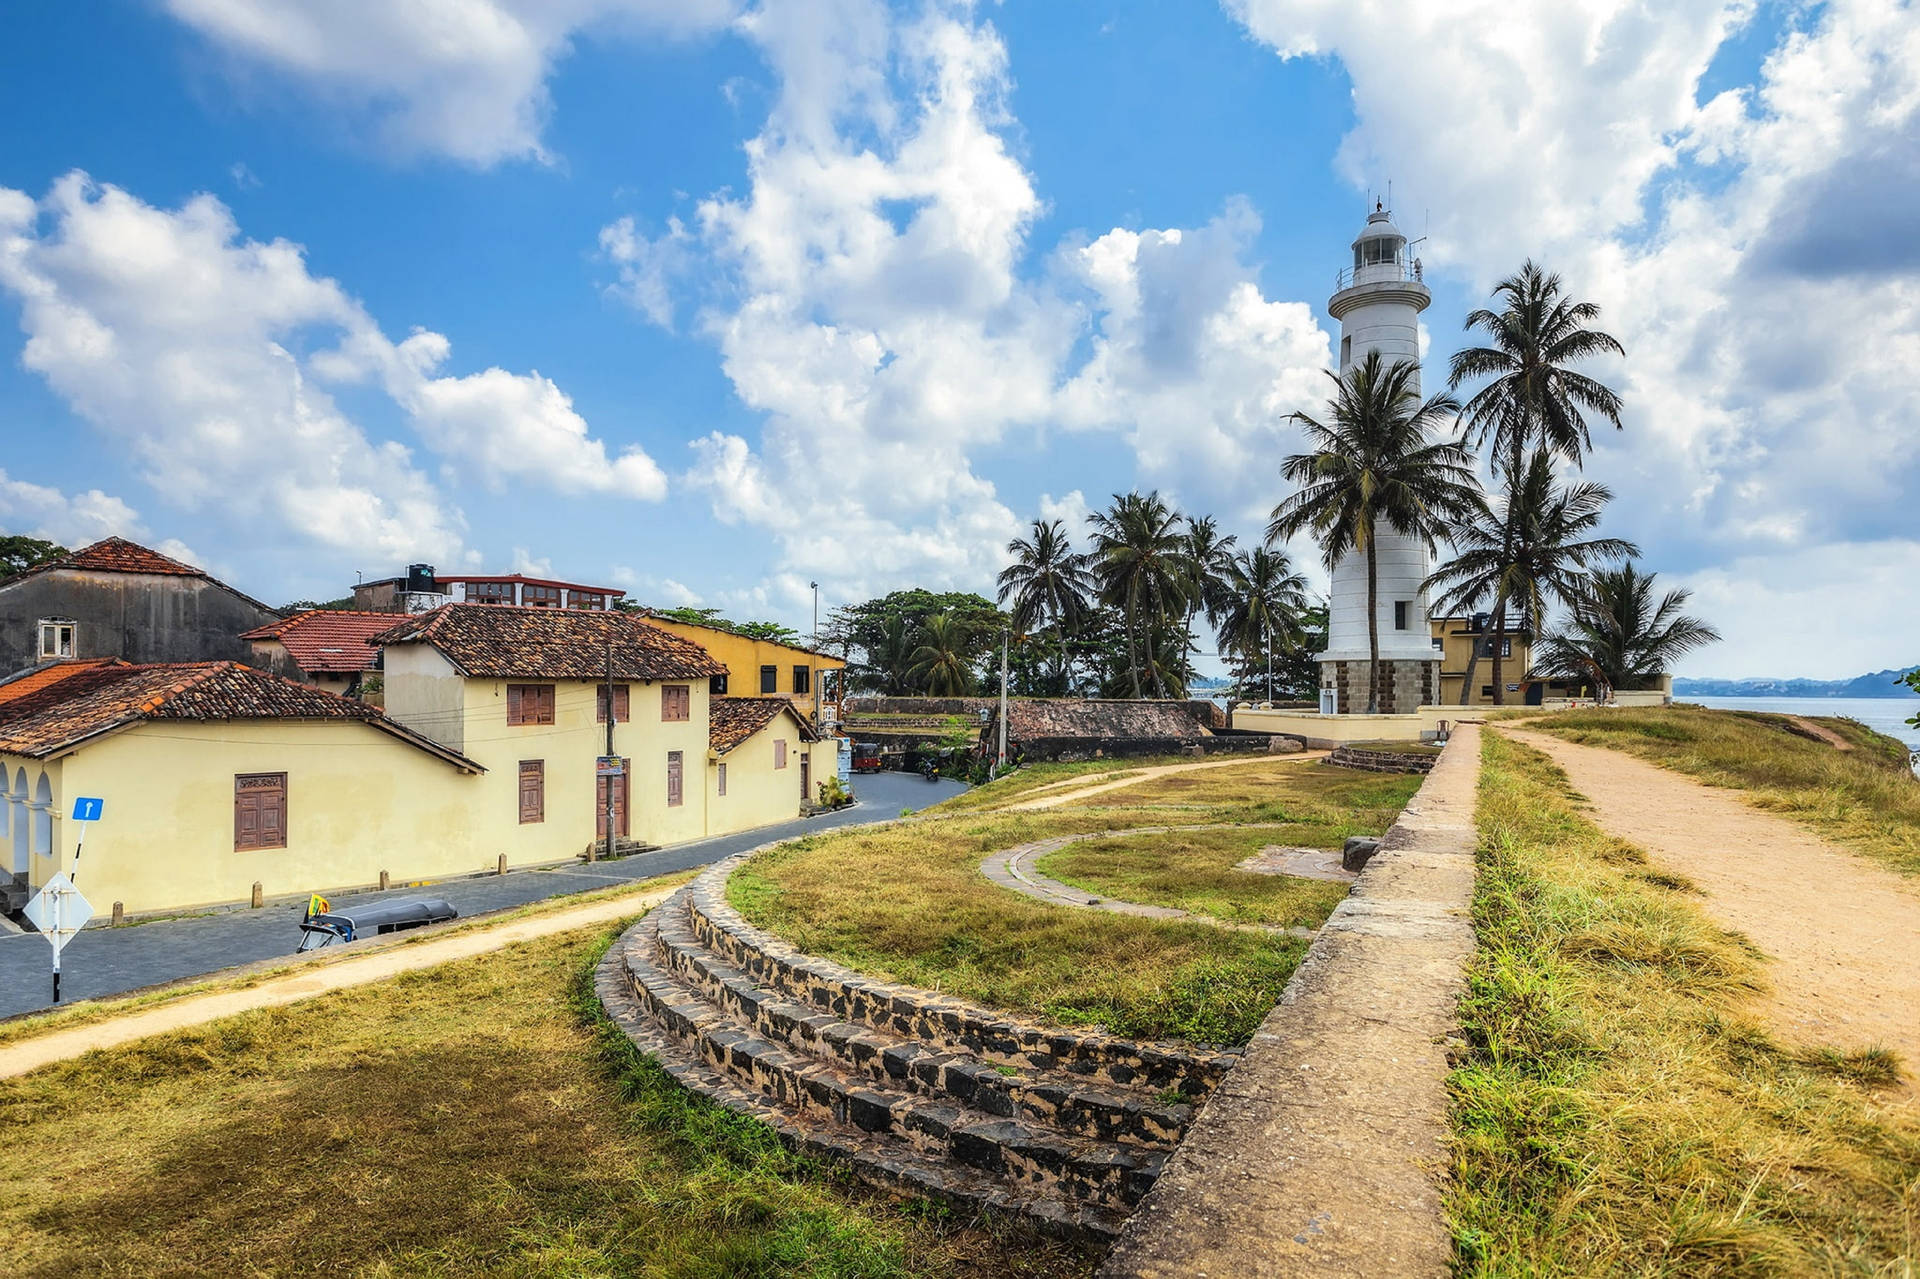 Sri Lanka Galle Fort Lighthouse Picture